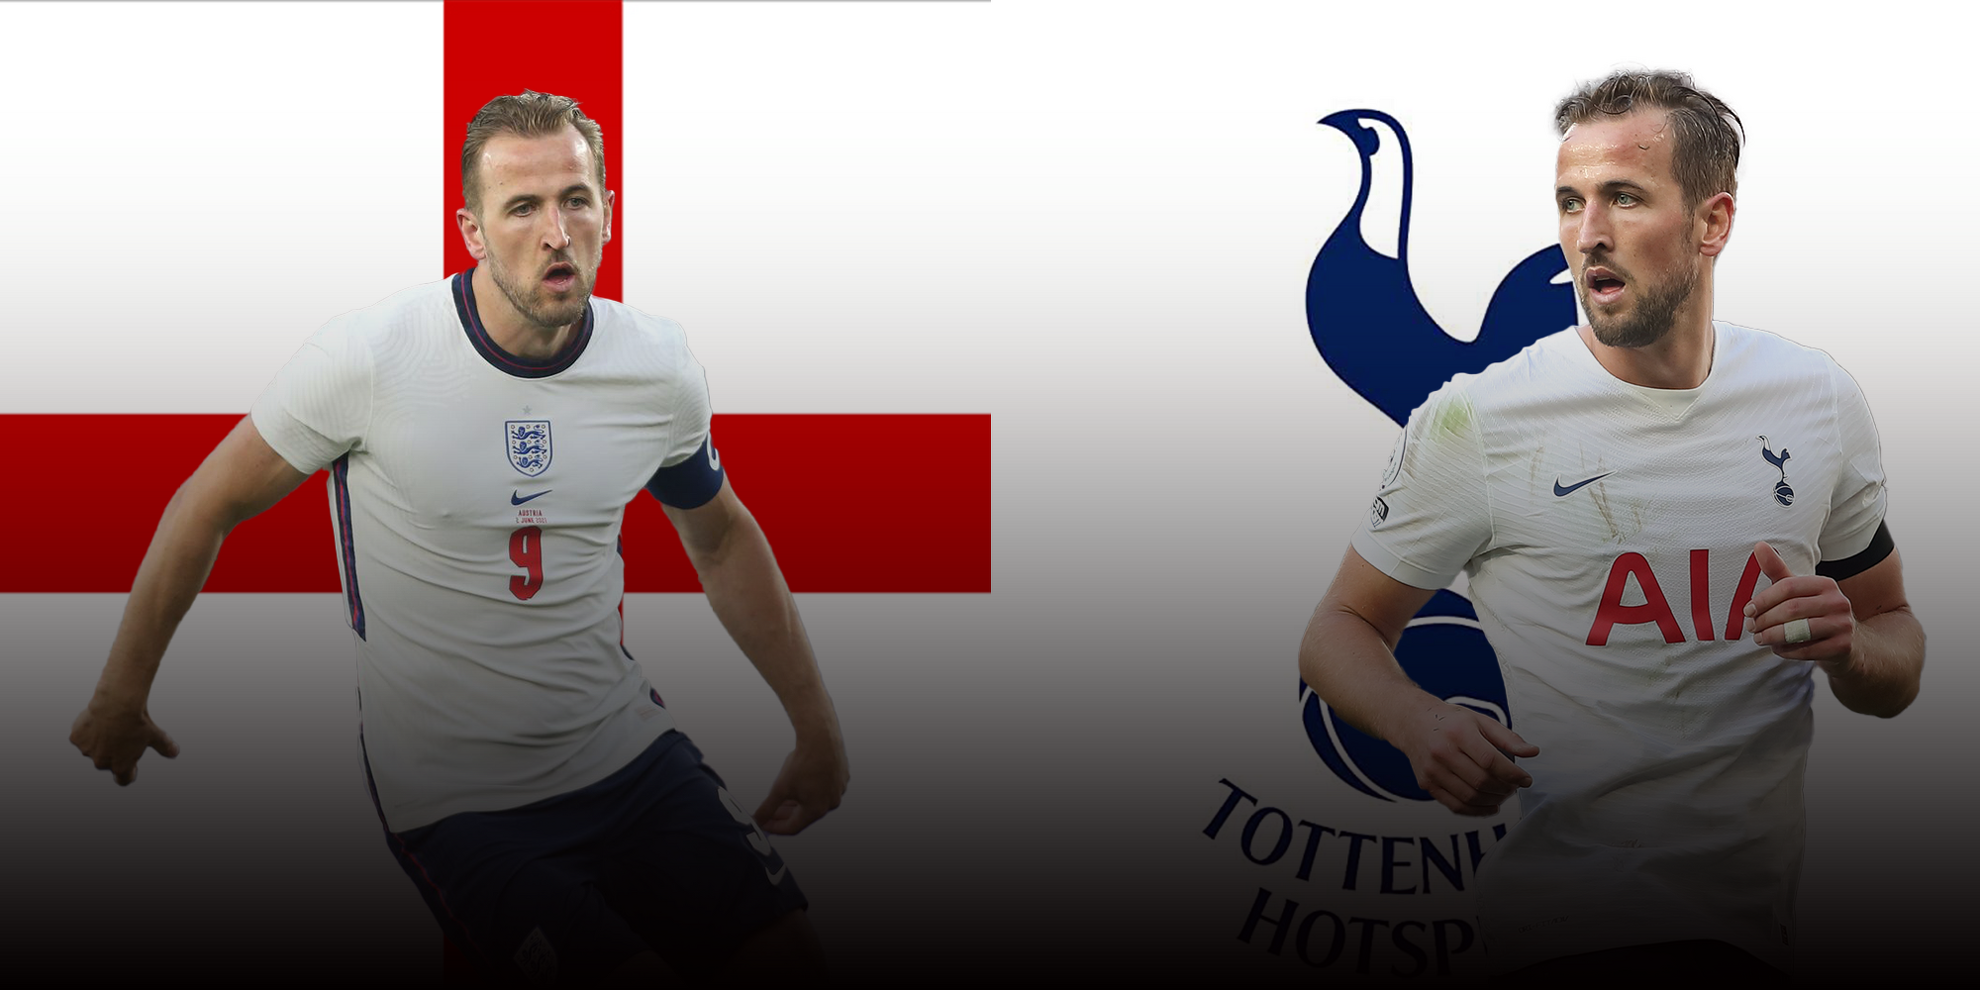 Top five records held by Harry Kane for Tottenham Hotspur & England